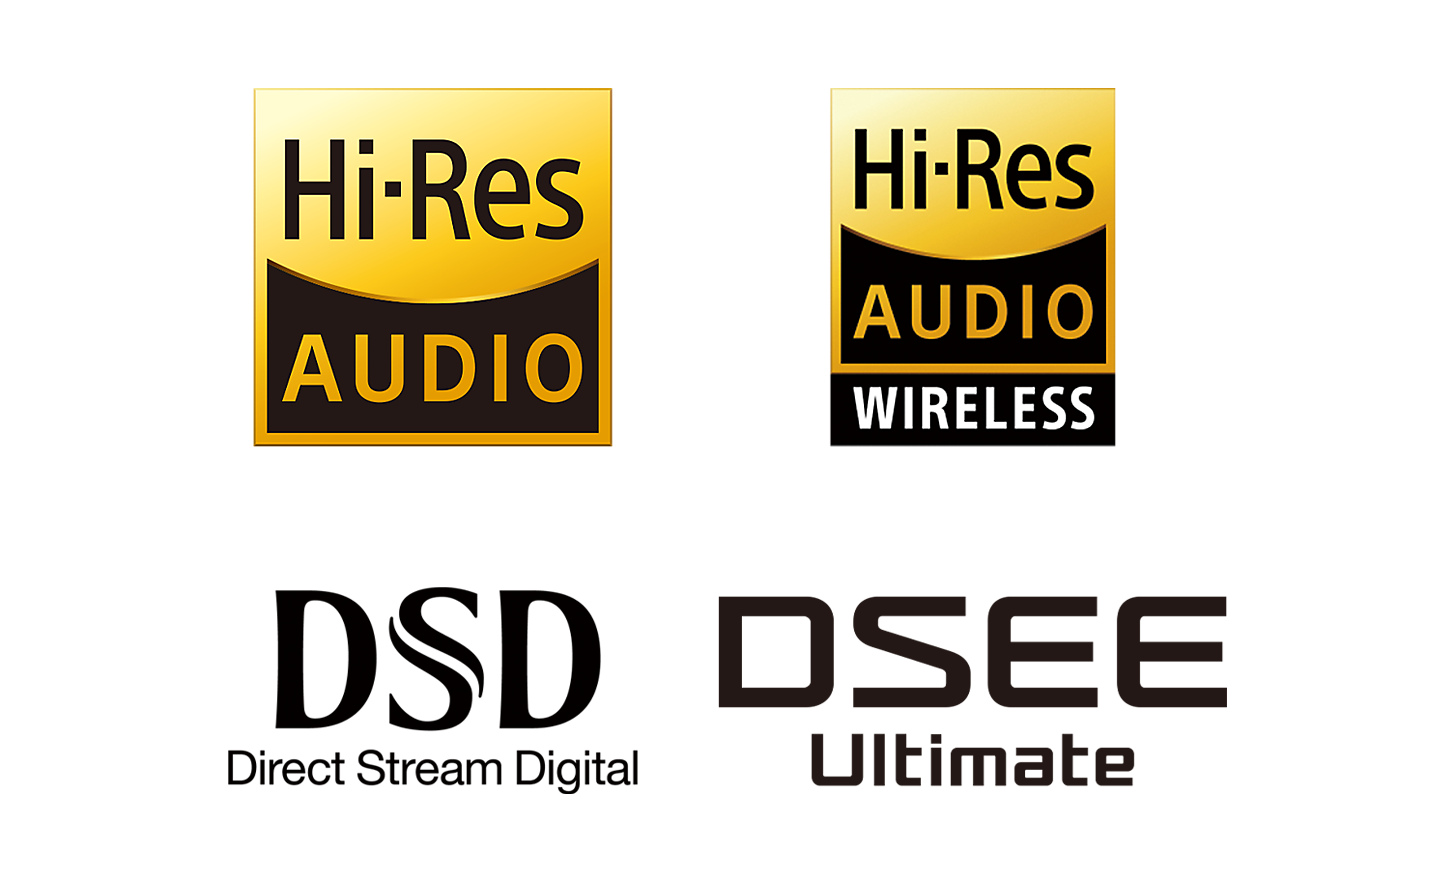 Logos High-Res Audio, High-Res Audio WIRELESS, DSD et DSEE.